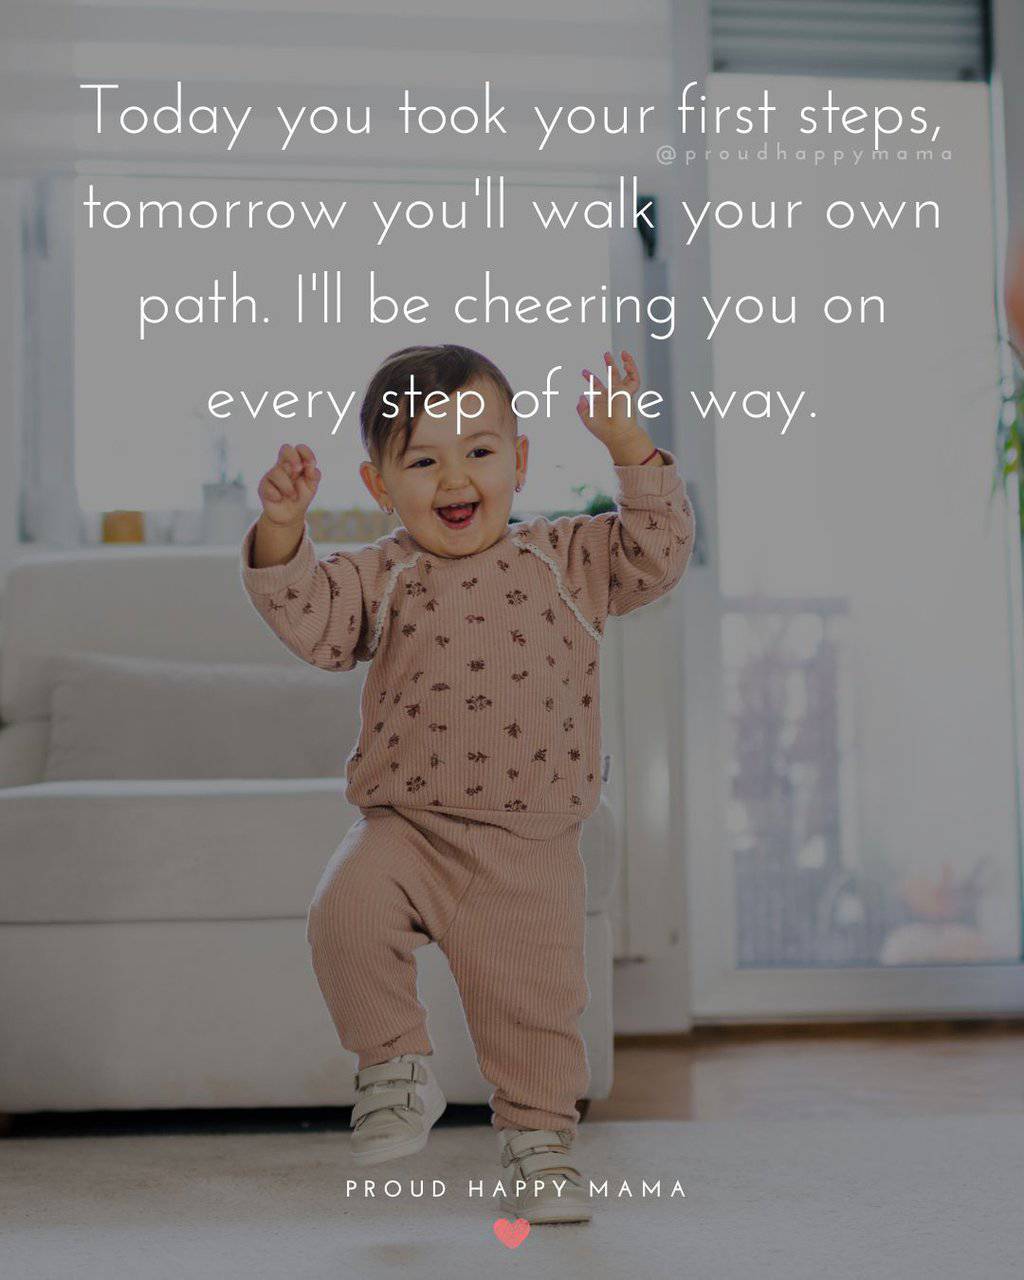 baby first steps quote - Today you took your first steps, tomorrow you'll walk your own path. I'll be cheering you on every step of the way.